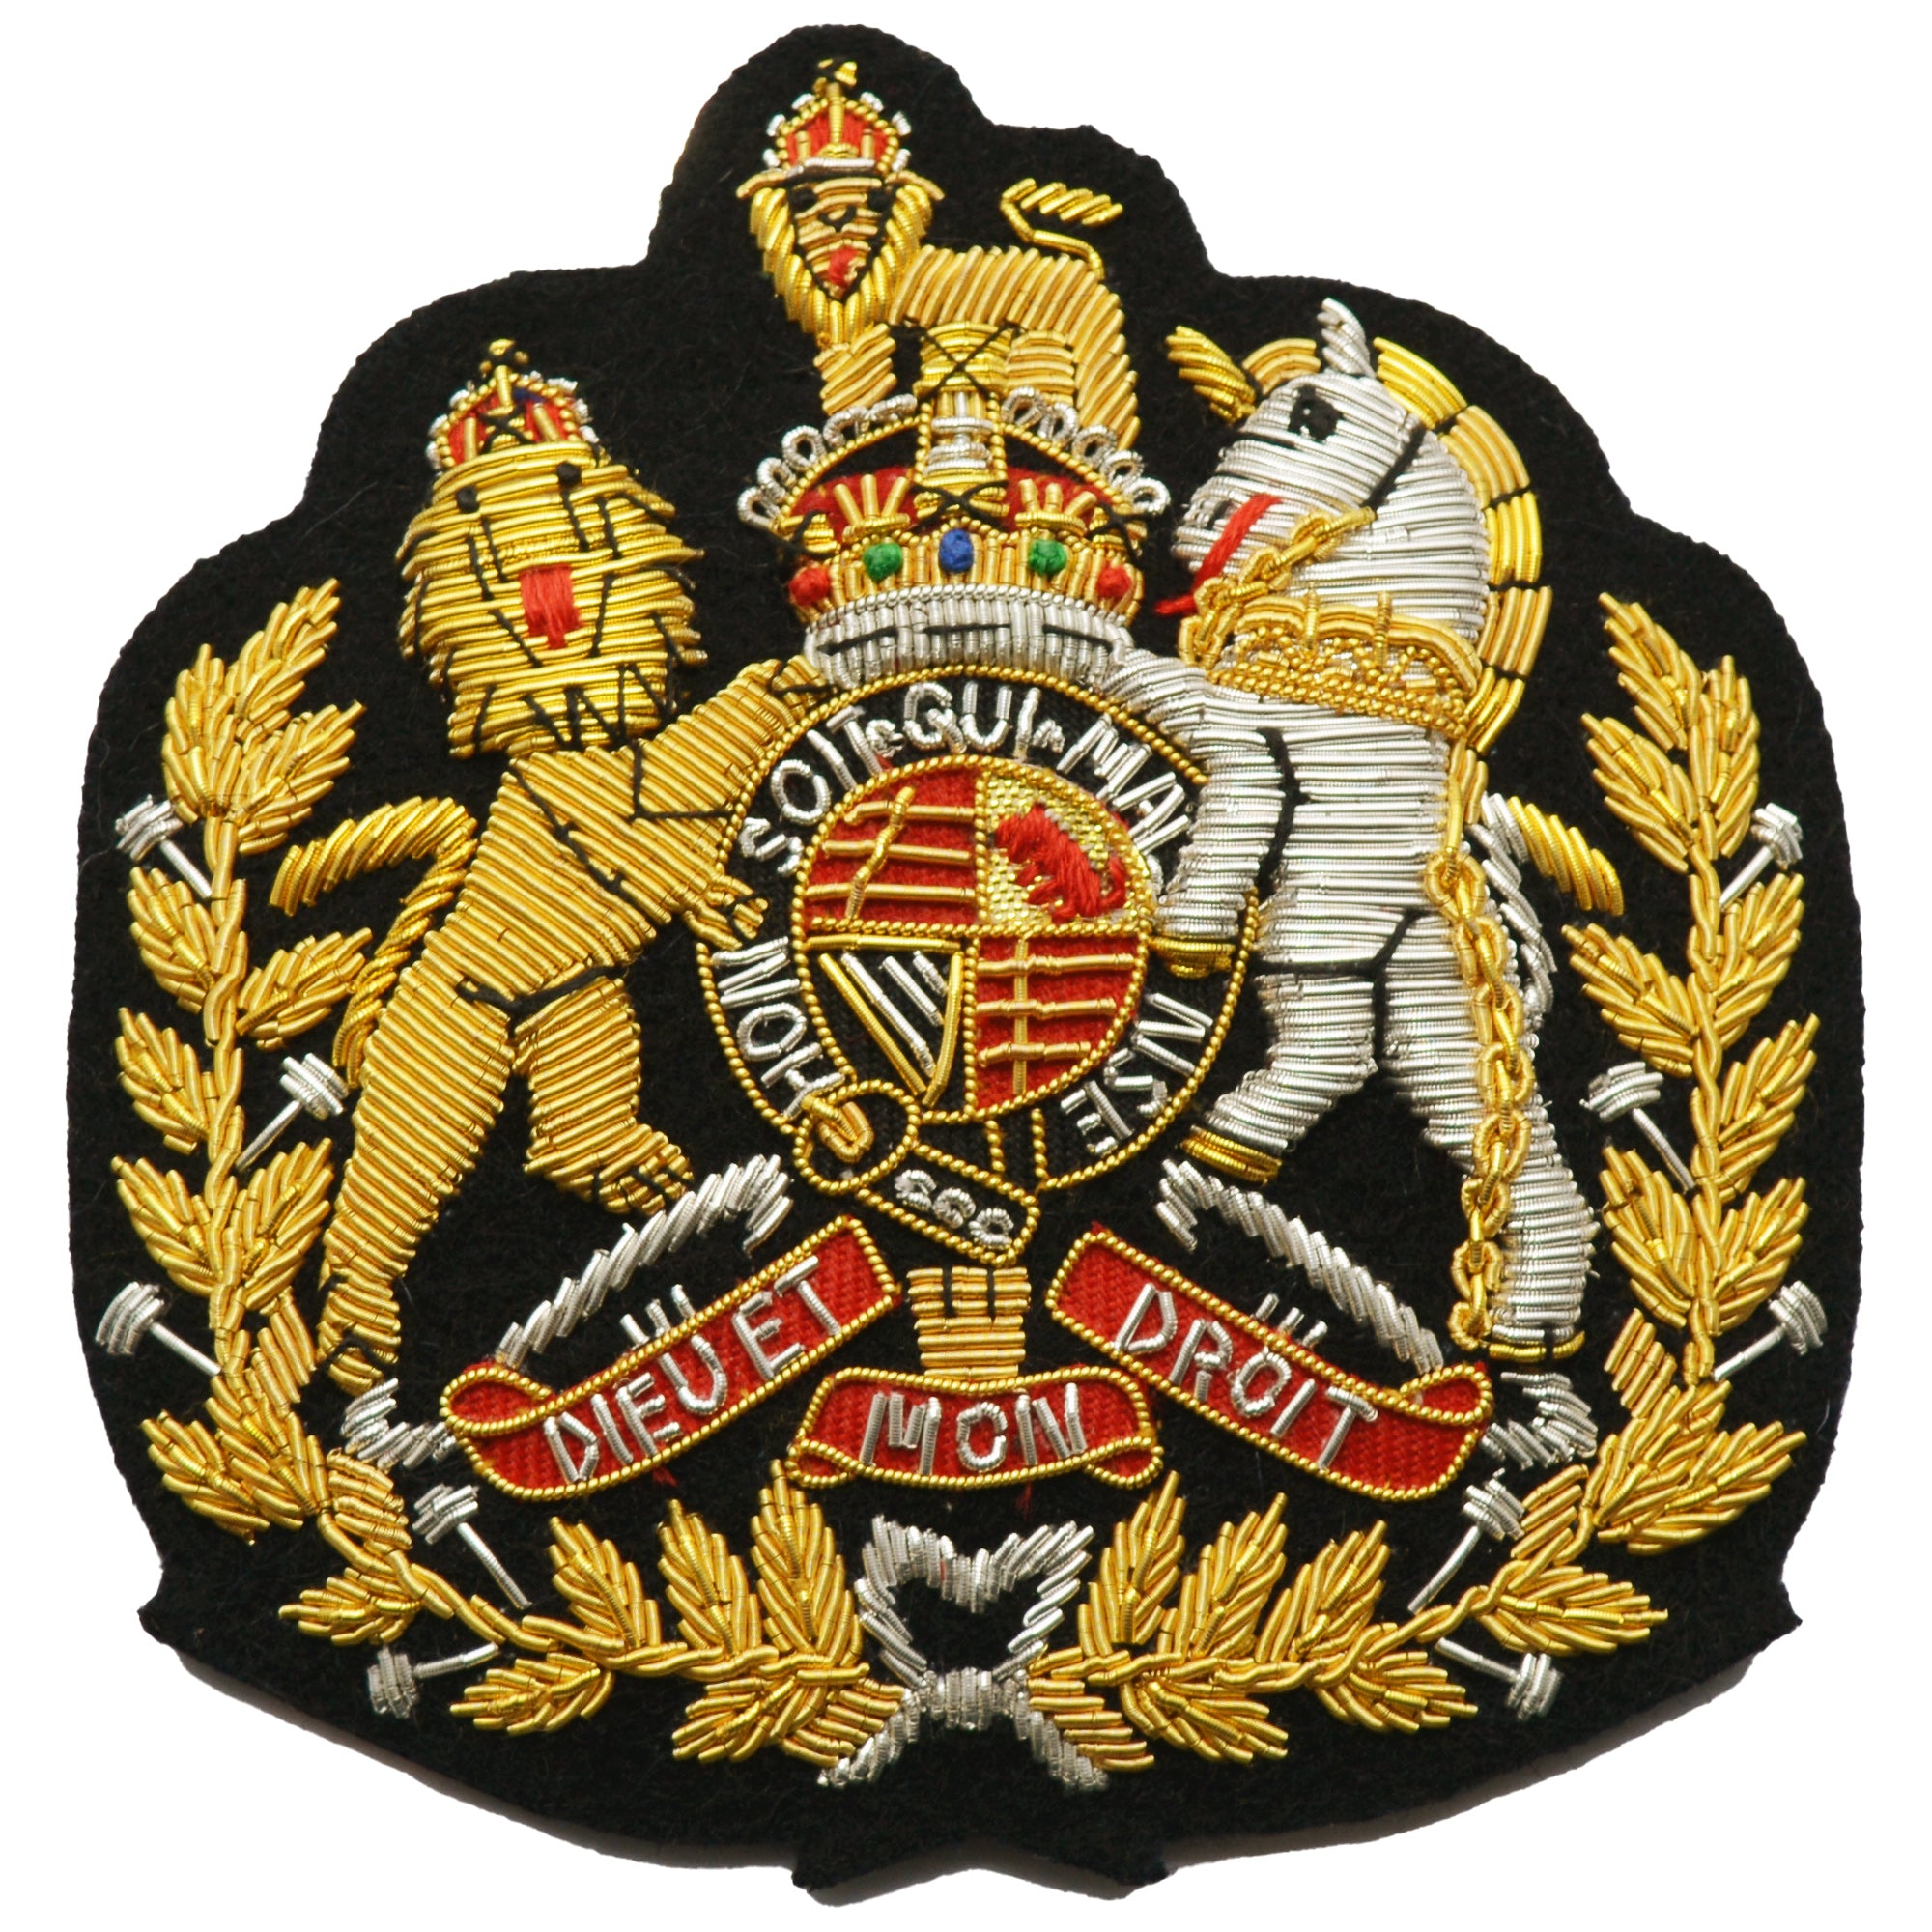 (King's Crown) Corps and Command Regimental Sergeant Major (RSM) Royal Arms Rank Badge British Army and Royal Marines